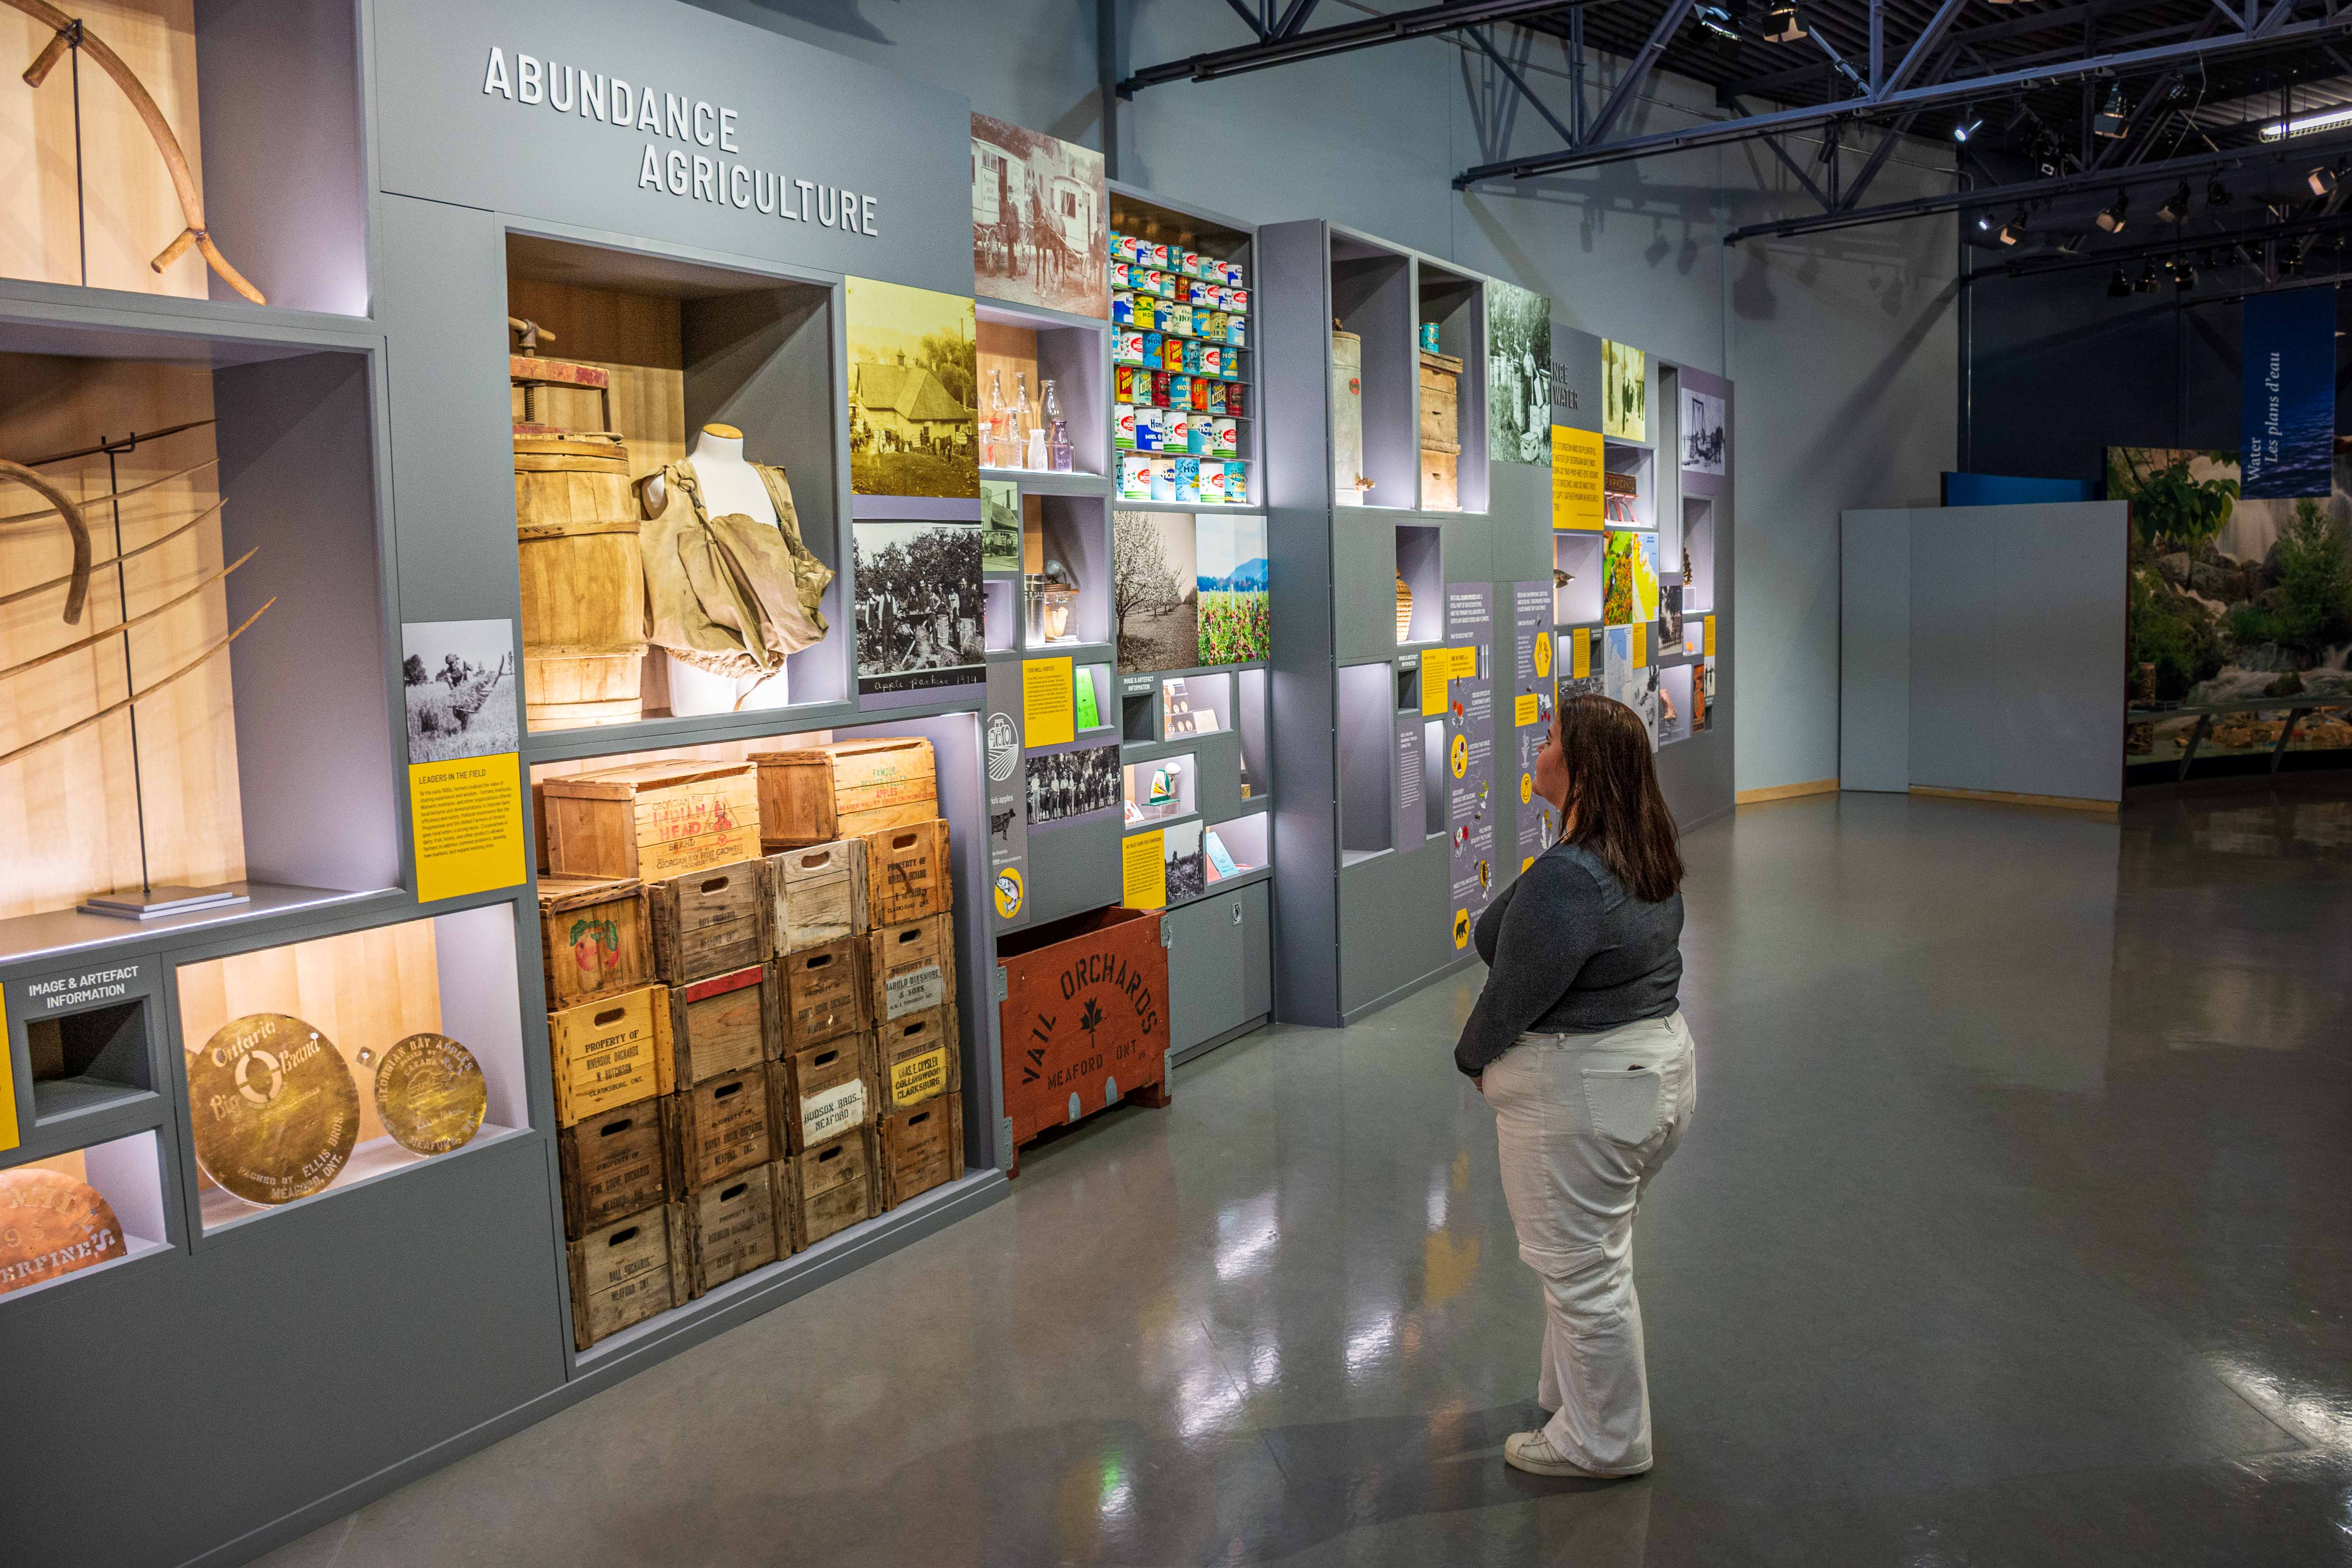 A young woman views artefacts related to apple harvest in the Abundance exhibit.